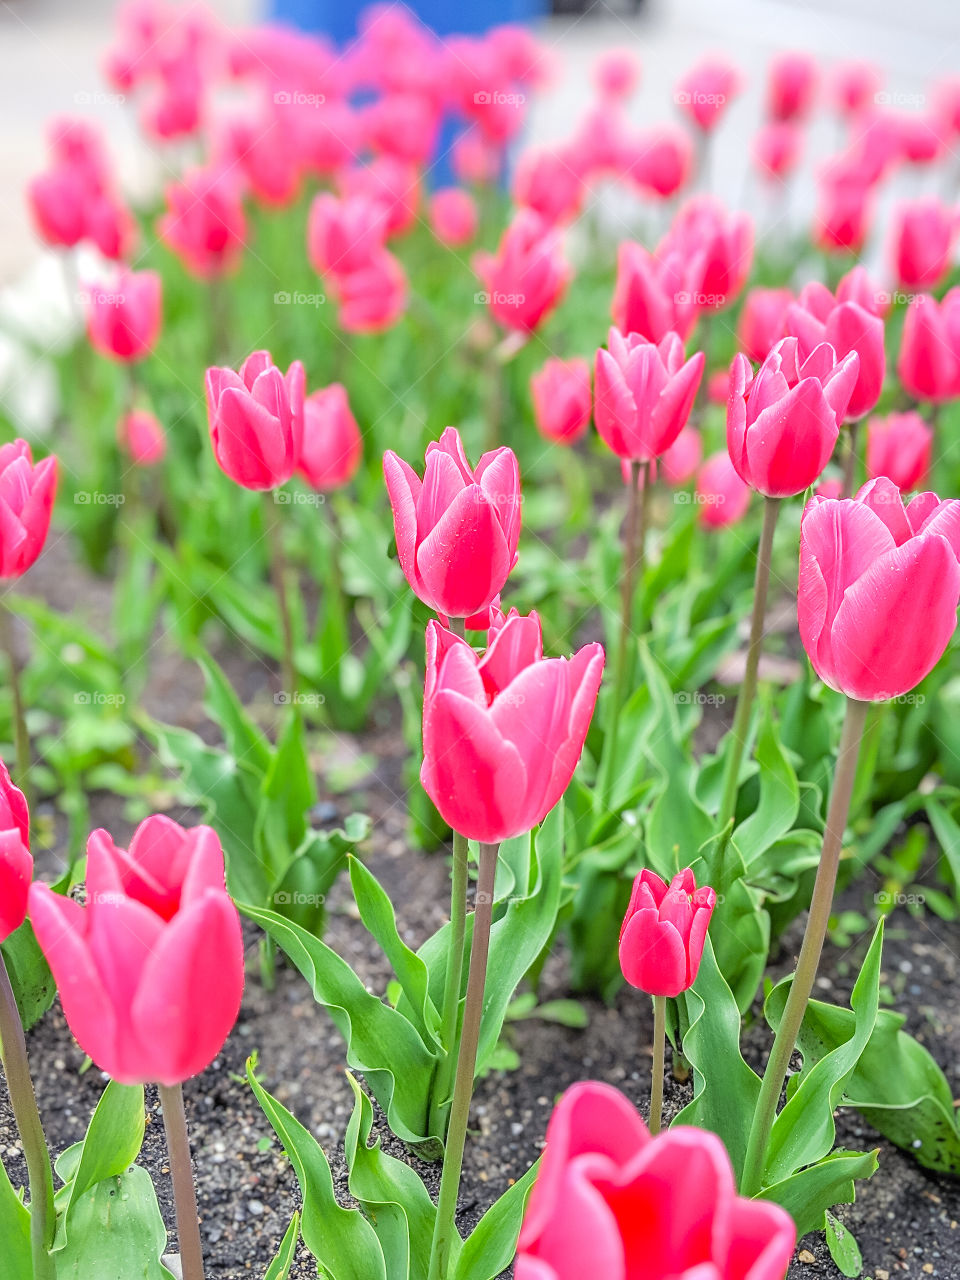 Vibrant and Bright Hot Pink Tulips